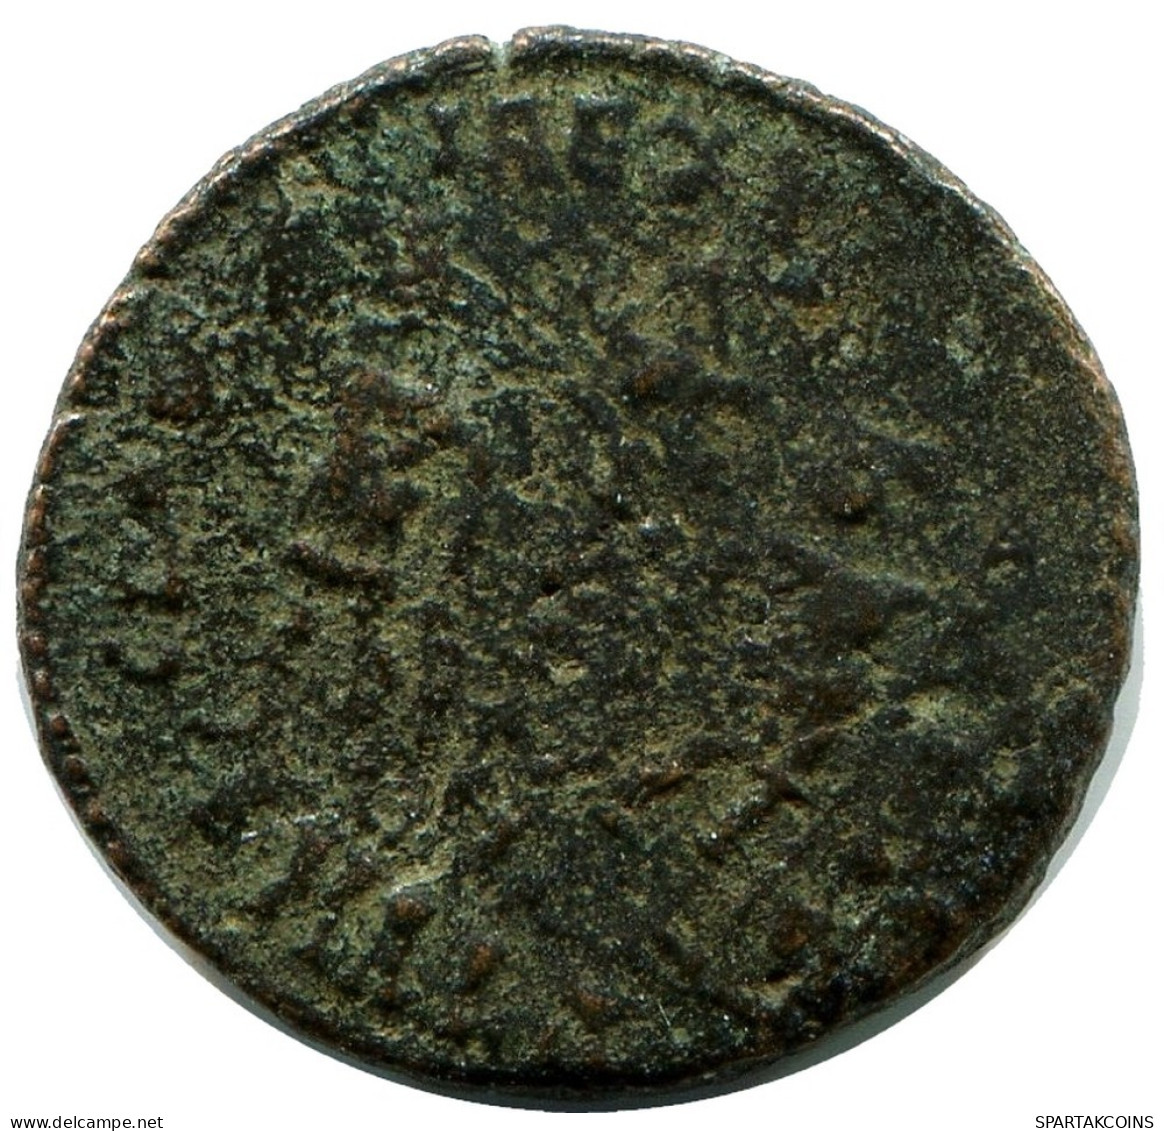 CONSTANS MINTED IN ALEKSANDRIA FROM THE ROYAL ONTARIO MUSEUM #ANC11428.14.F.A - The Christian Empire (307 AD Tot 363 AD)